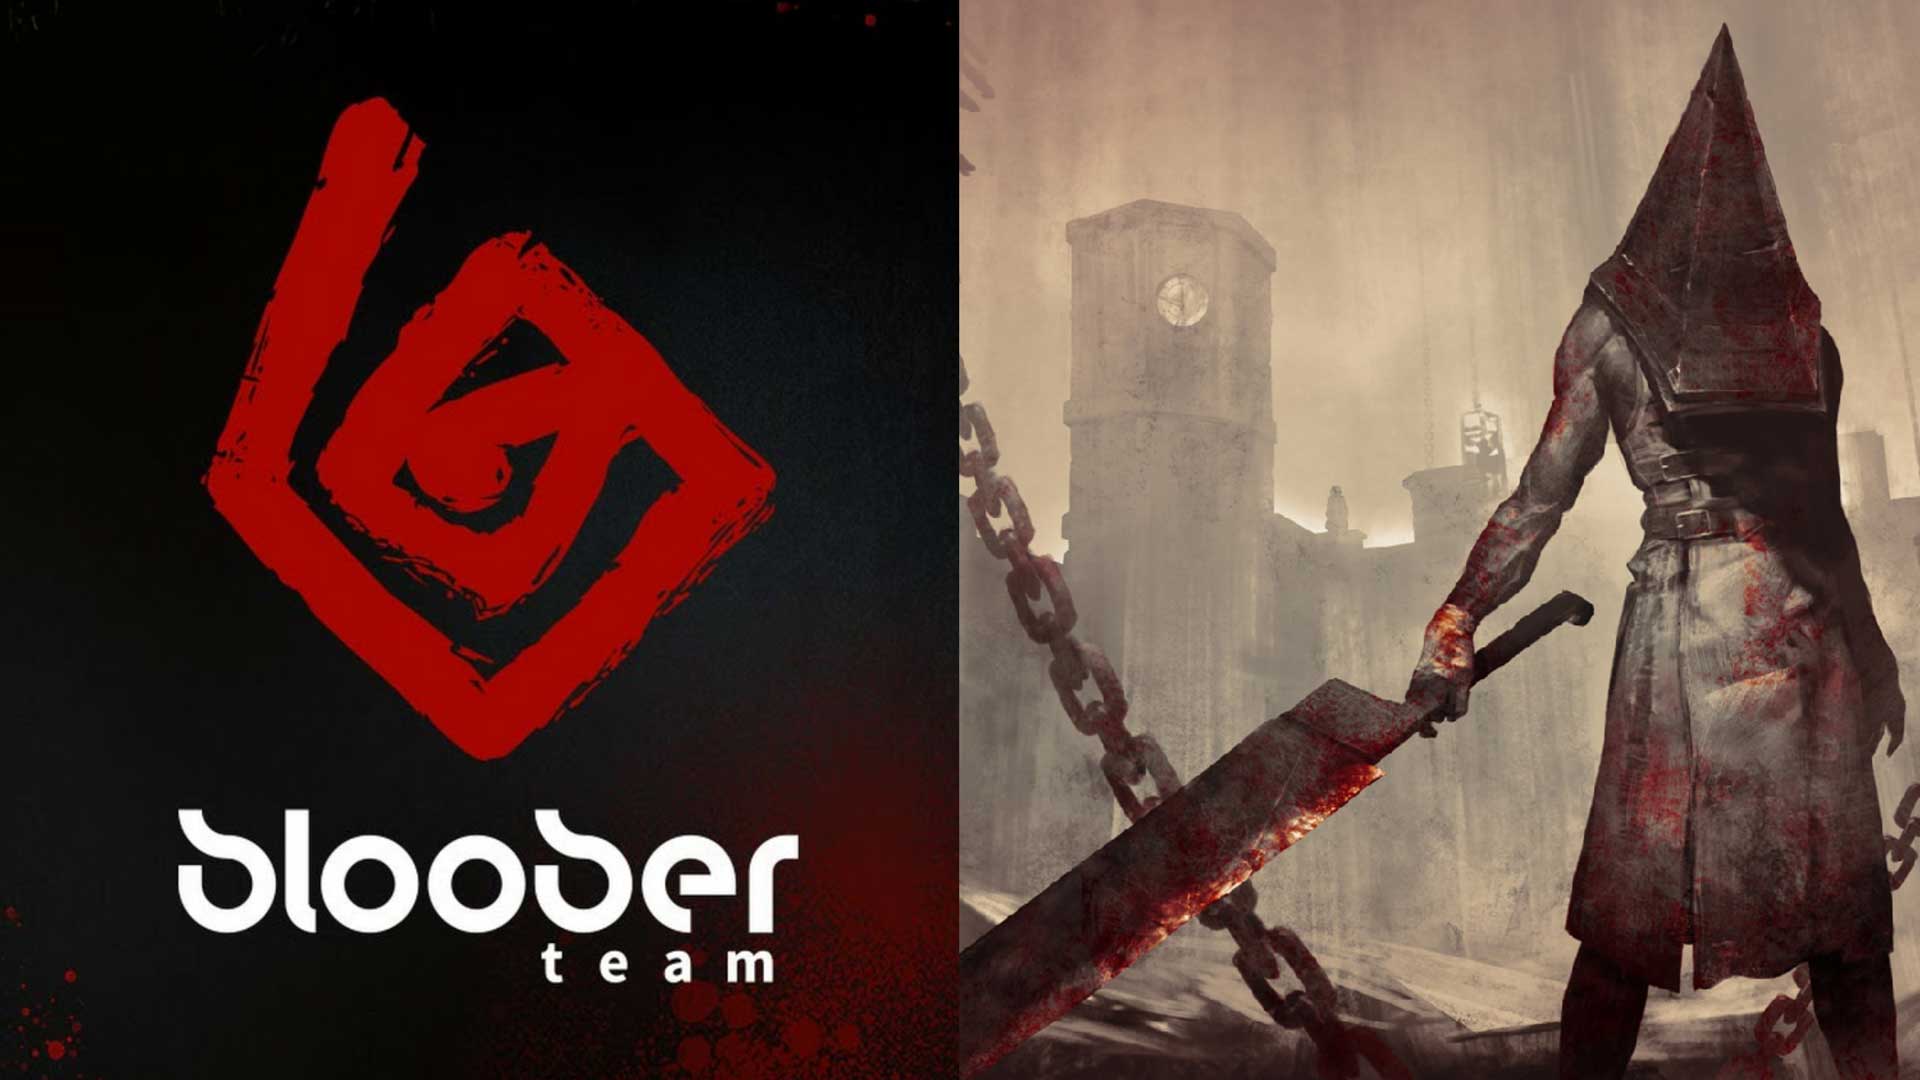 The logo of the Polish game development studio Blueberry Team next to the pyramid image of the Silent Hill game series